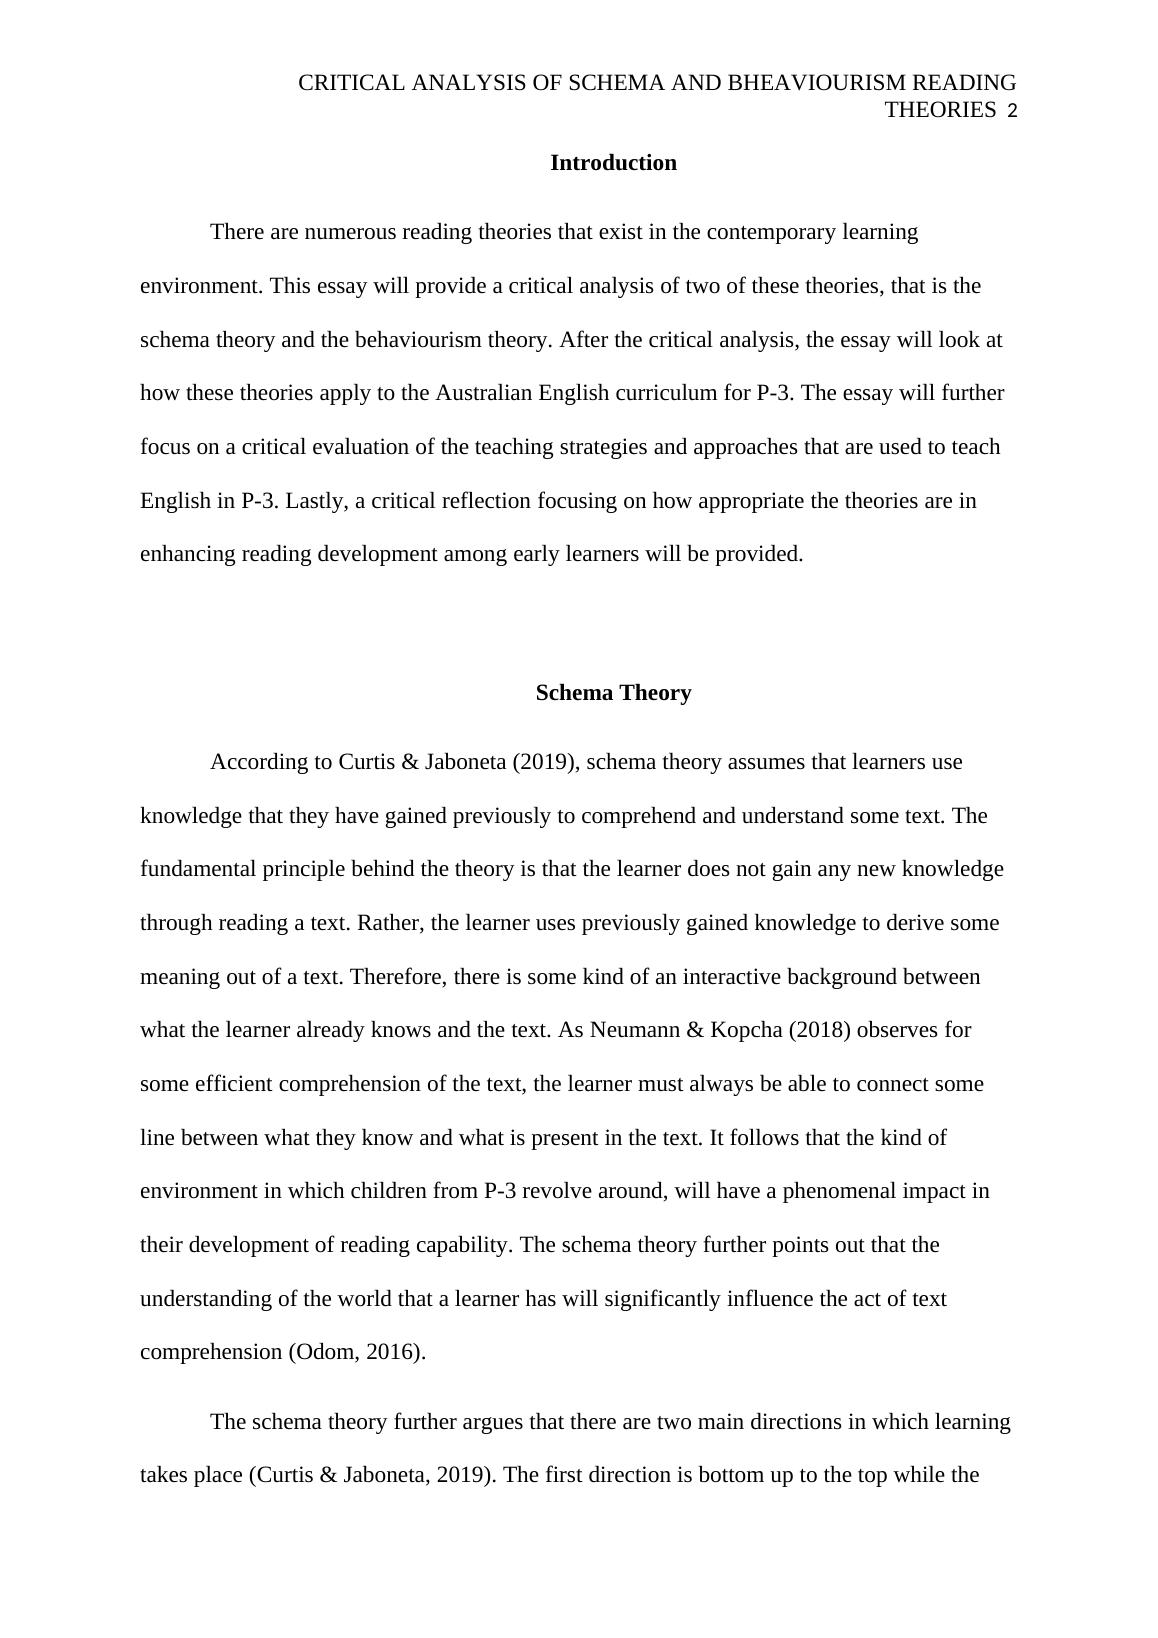 Critical Analysis of Schema and Behaviorism Reading Theories Essay 2022_2